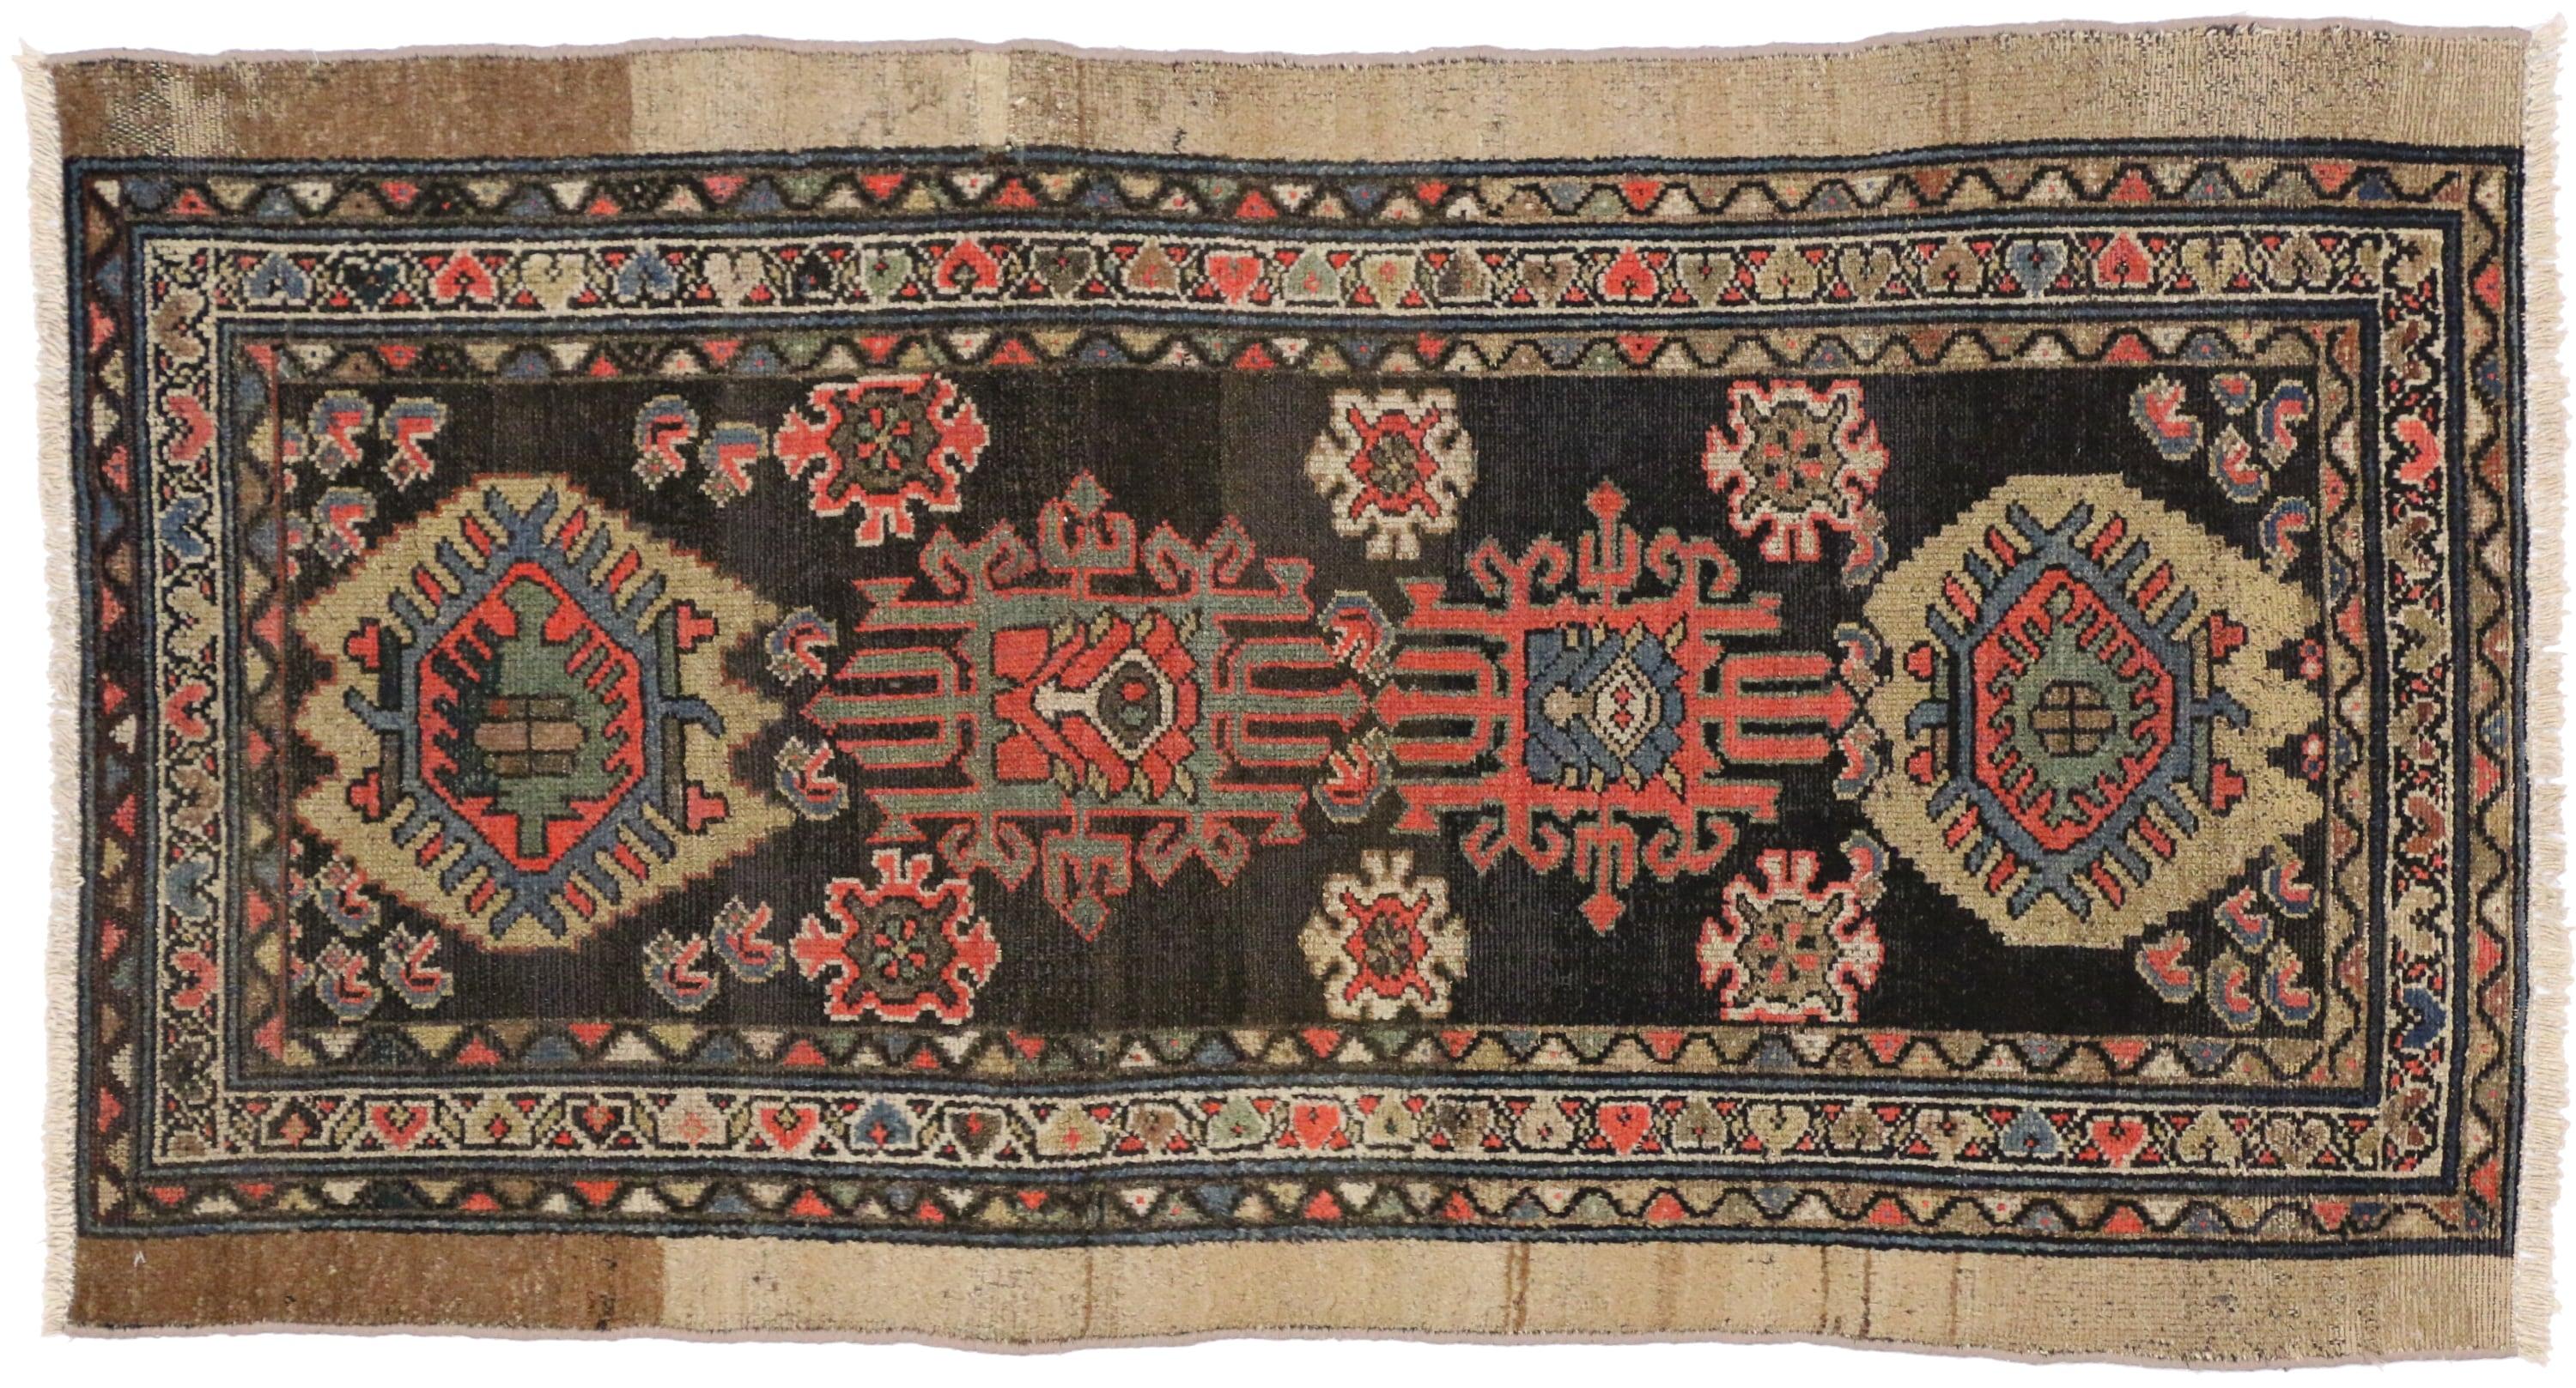 72610, antique Nahavand Hamadan accent rug with tribal style, small runner. Traditional meets bohemian in this stunning artifact of Persian weaving. Tribal and rustic in style, this antique Nahavand Hamadan rug is the perfect accent to virtually